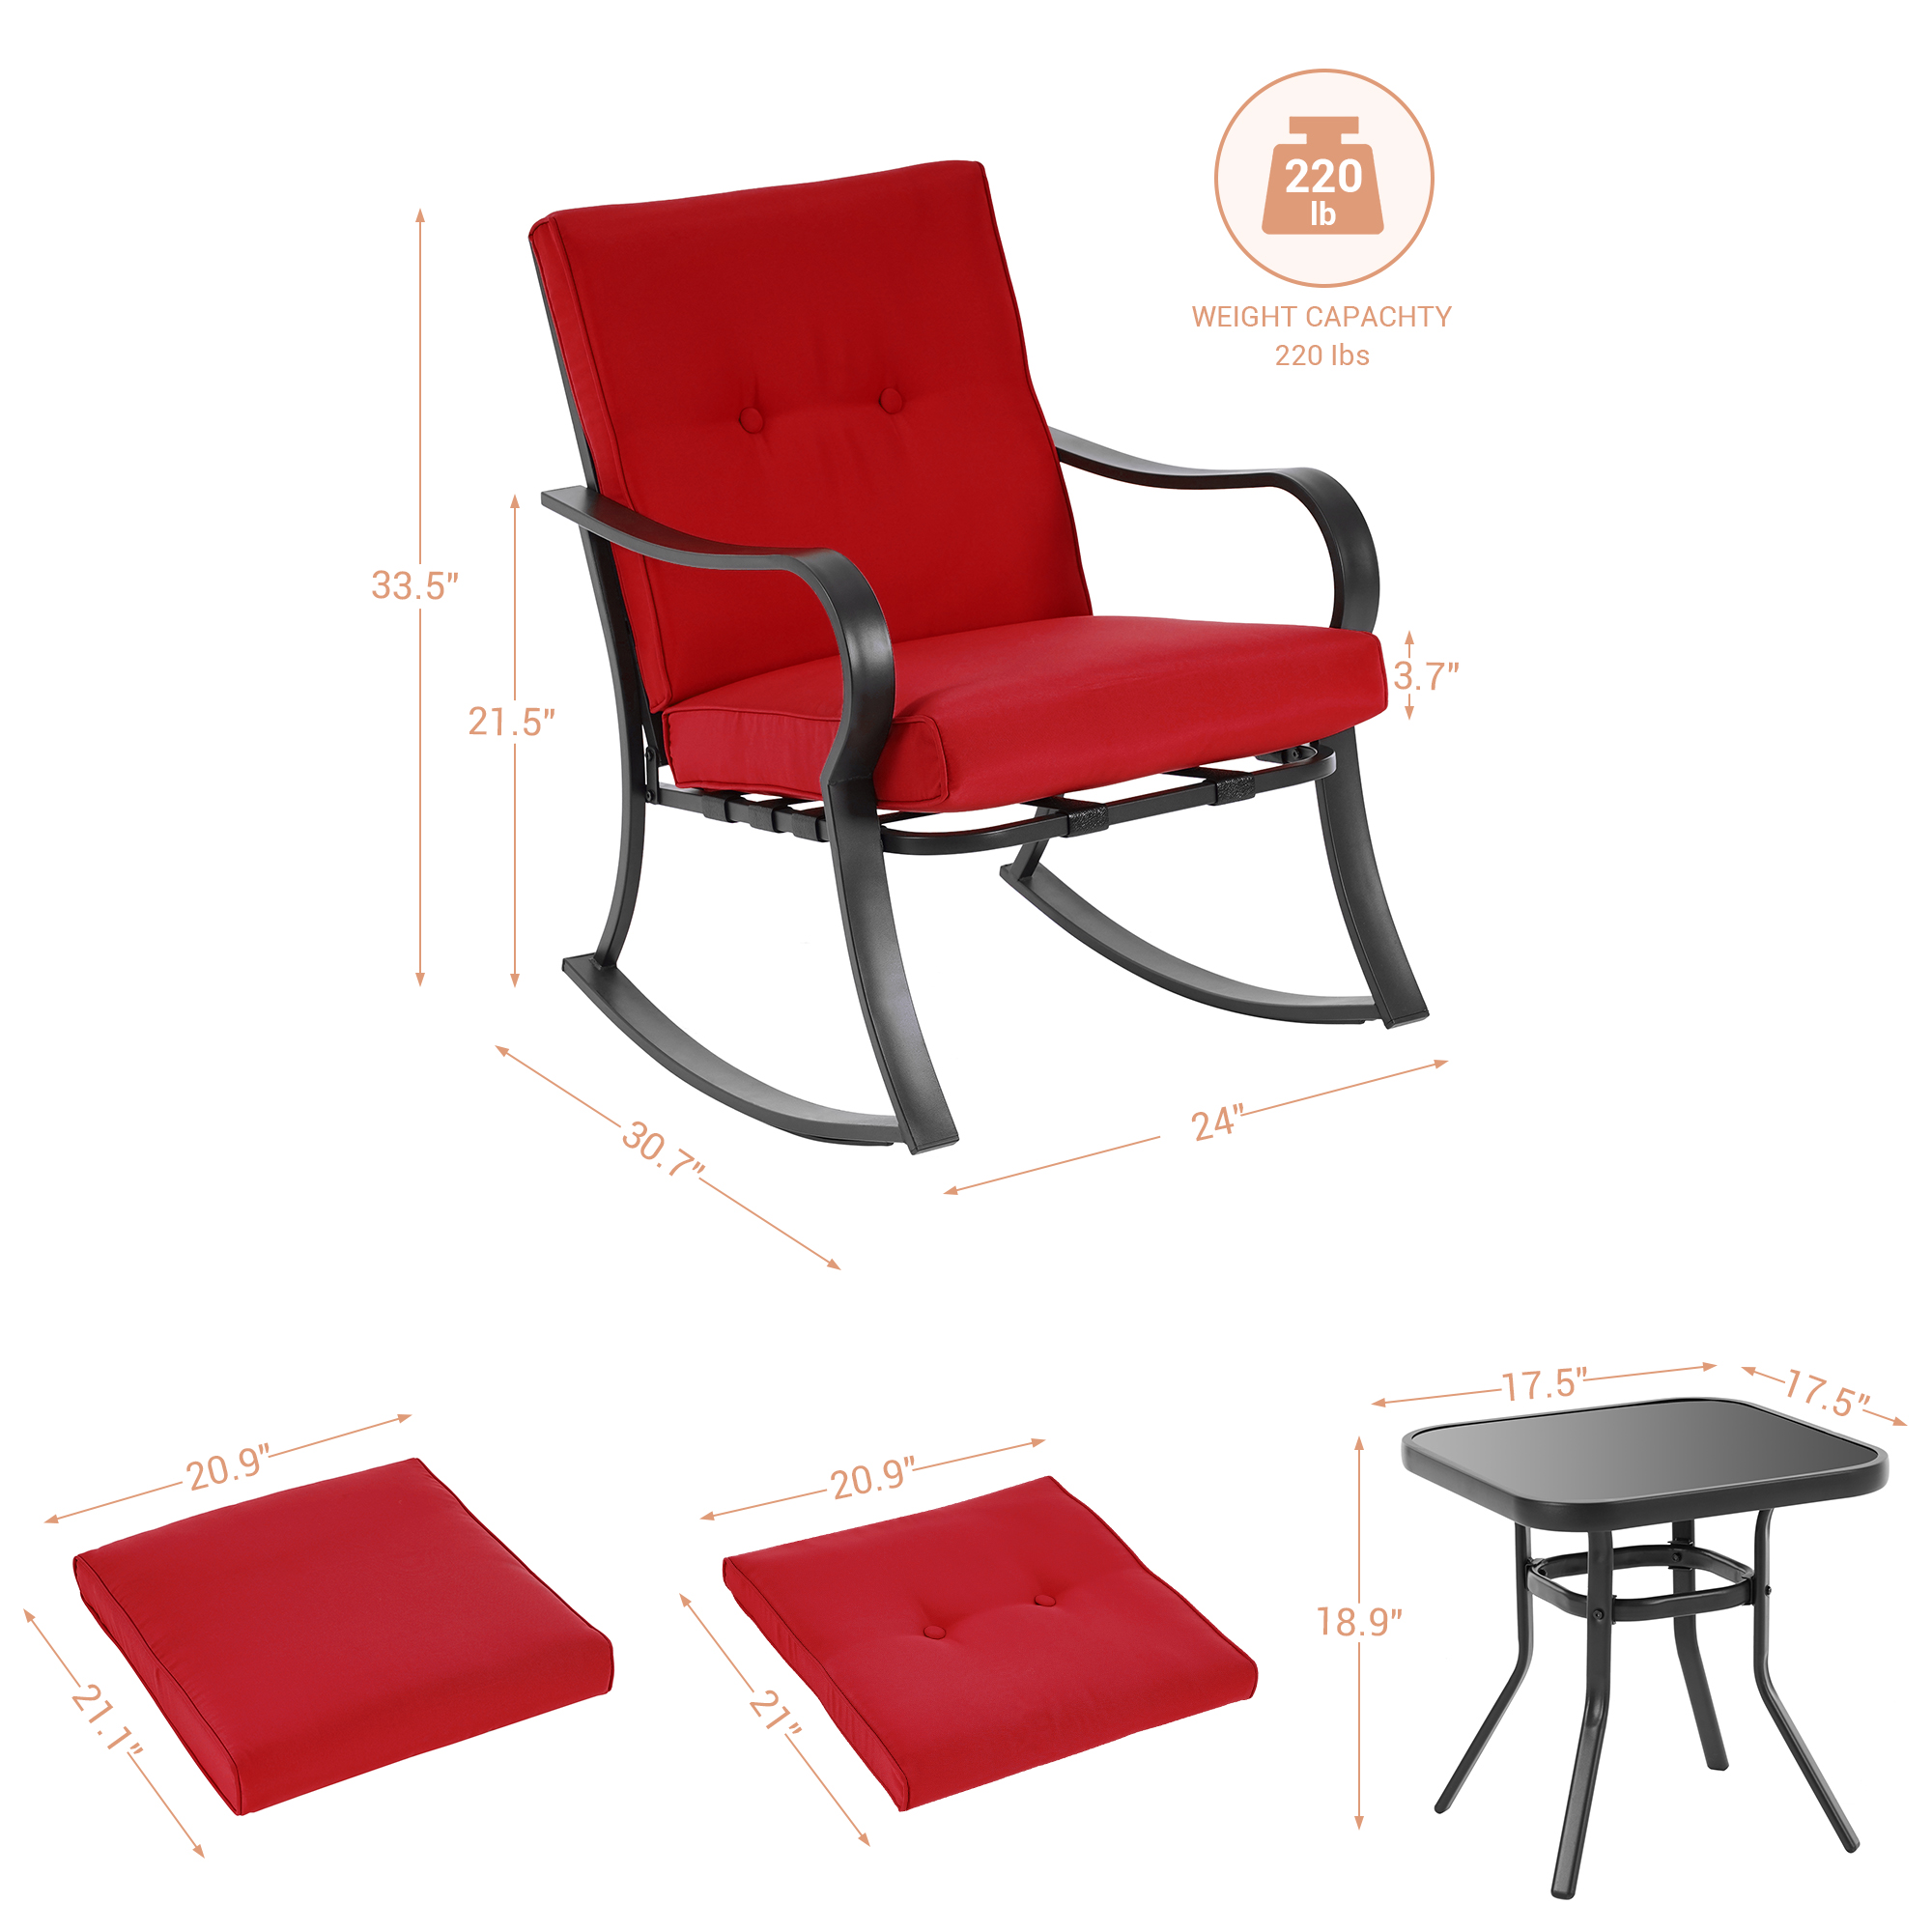 Outdoor Lounge Chair Courtyard Rocking Chair 3-Piece Steel Frame Outdoor Furniture Sets Thick Cushion Red Double Armchair Deck Backyard Bistro Set - image 4 of 8